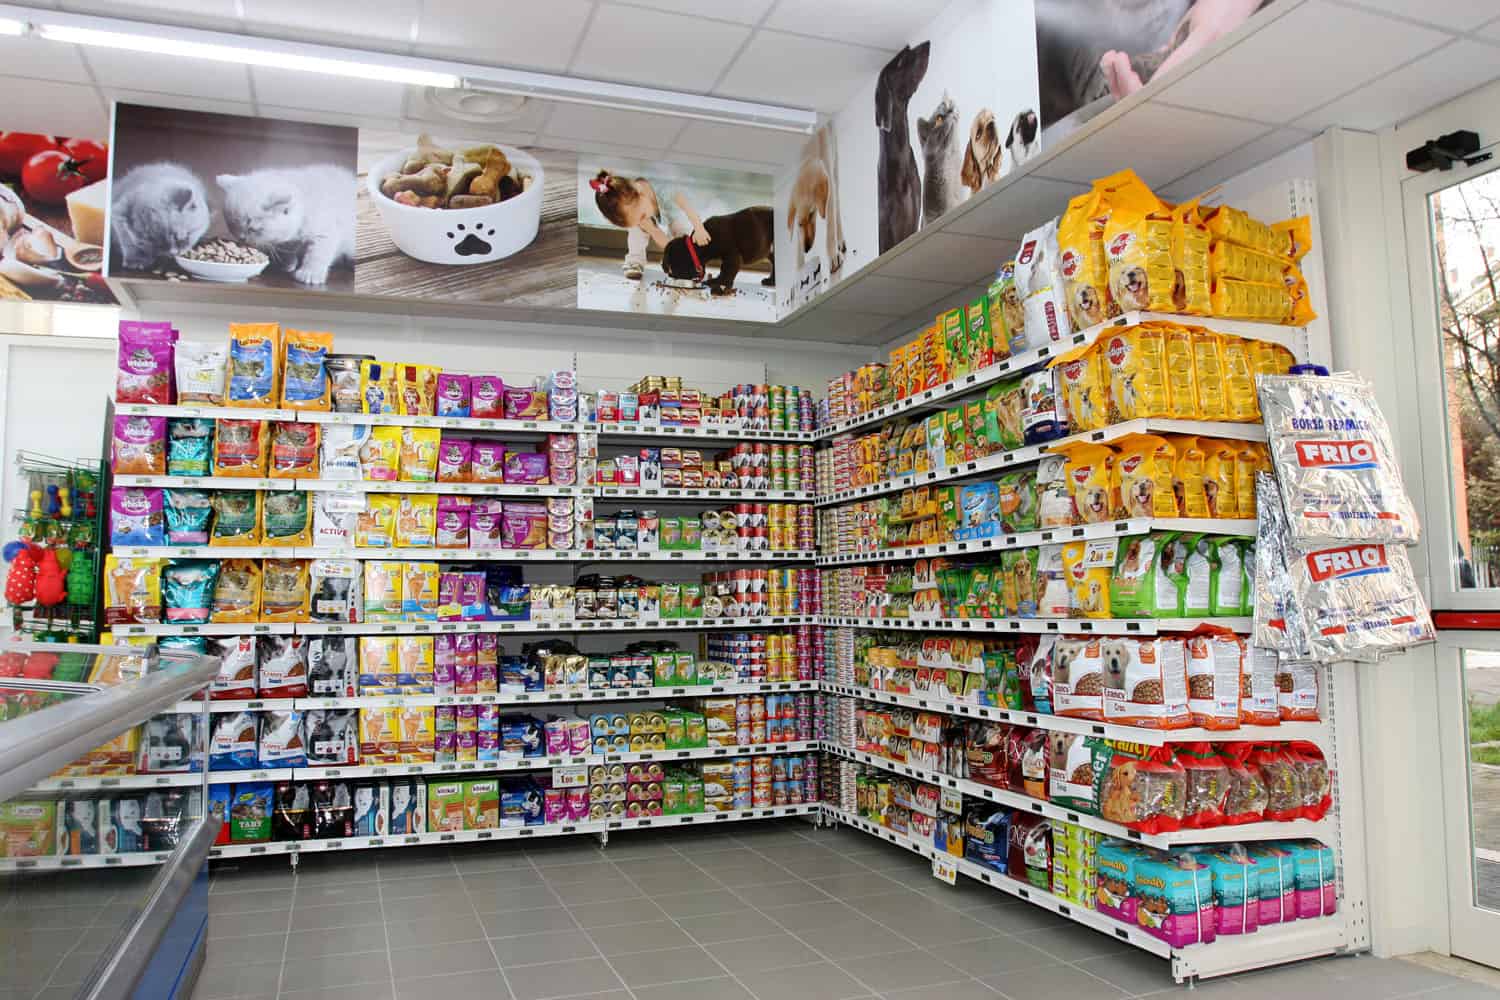 Pet food store shelves inside a new market (M.A. Supermarket) opening in Rome, Italy.